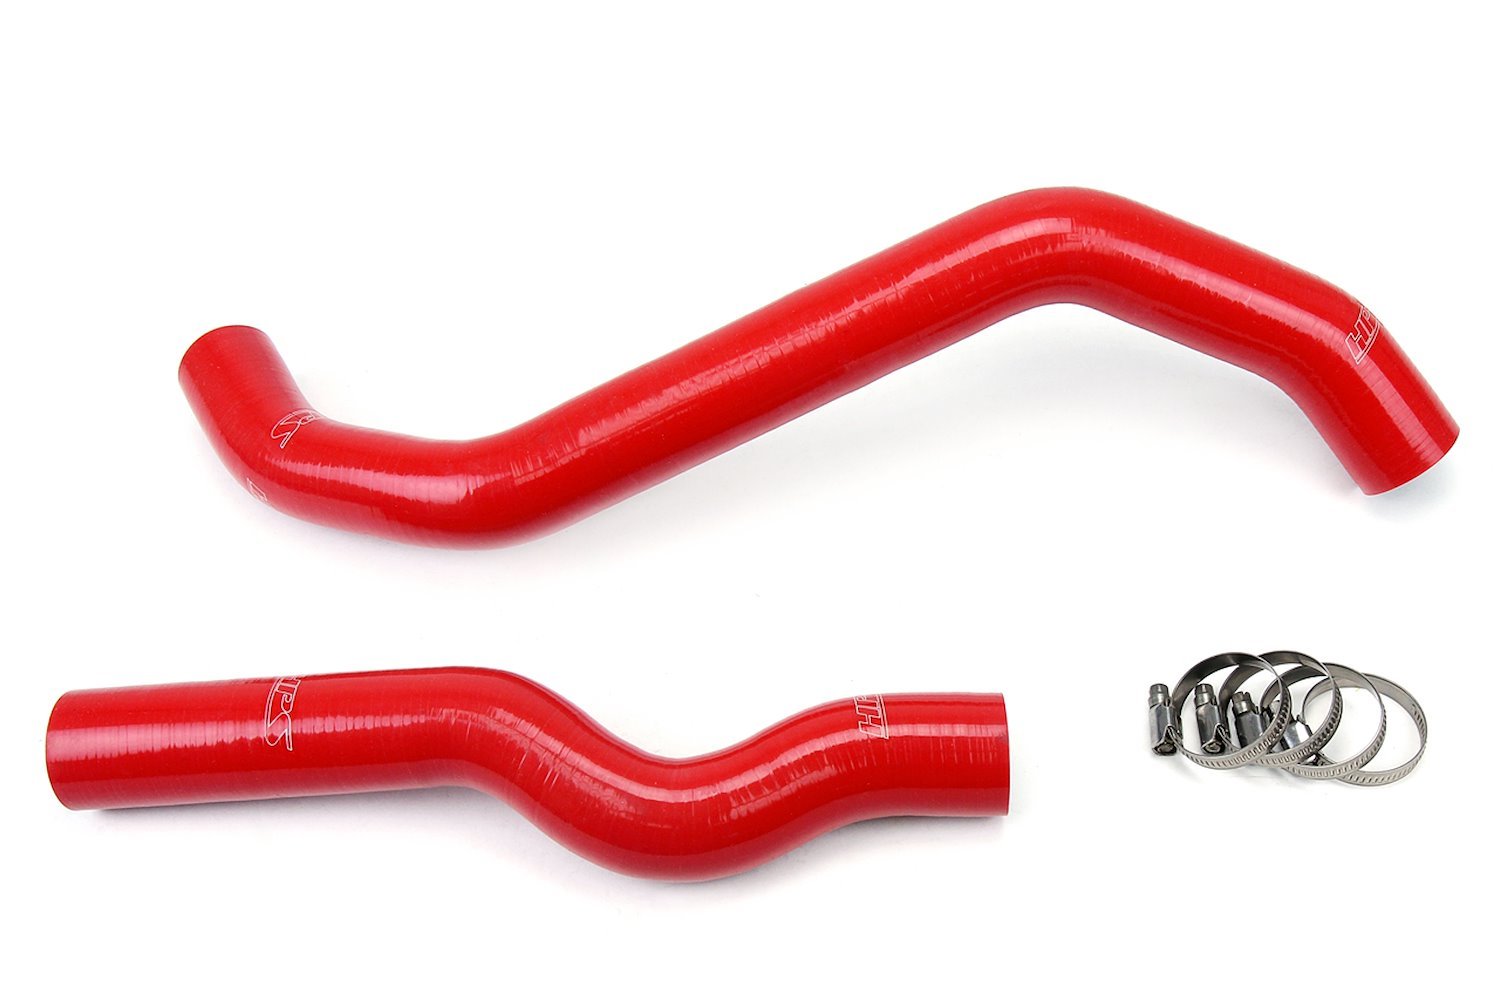 57-1792R-RED Radiator Hose Kit, High-Temp 3-Ply Reinforced Silicone, Replace OEM Rubber Radiator Coolant Hoses